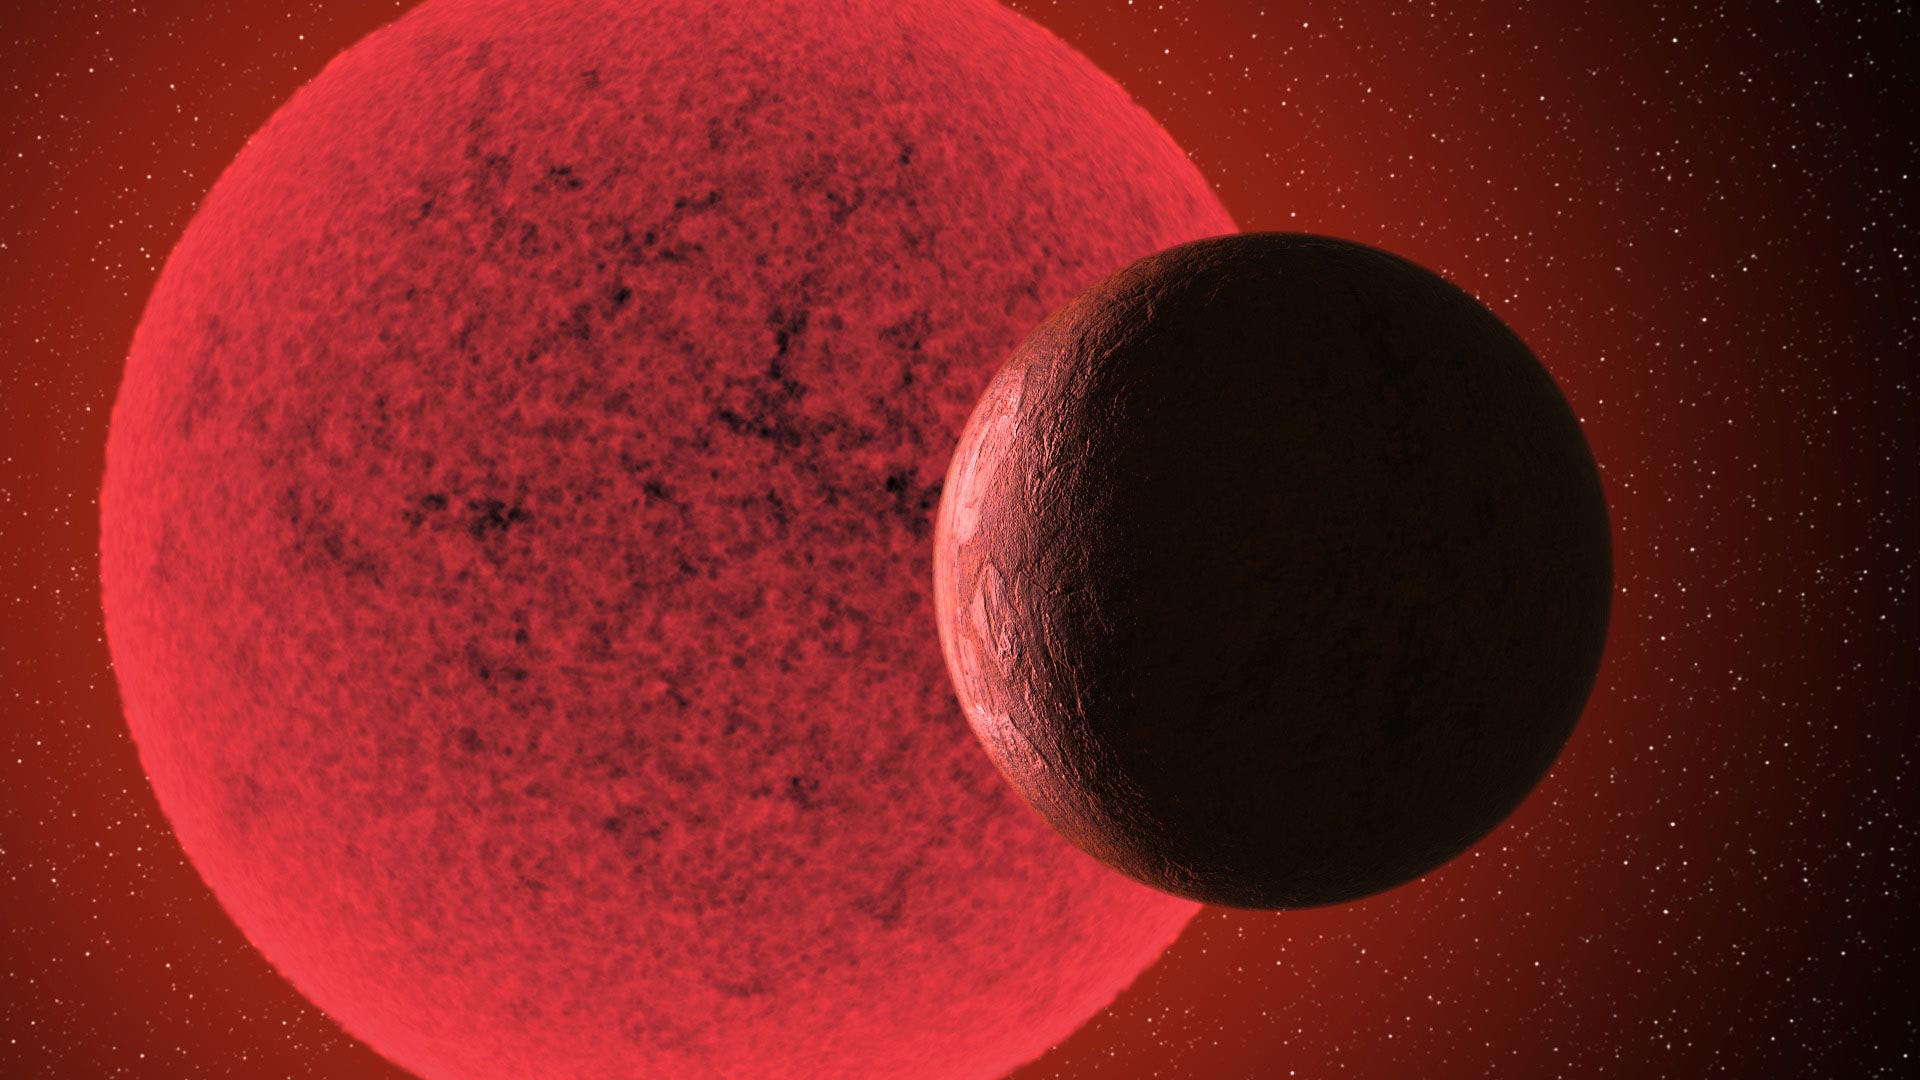 Astronomers detect a new super-Earth orbiting a Red Dwarf